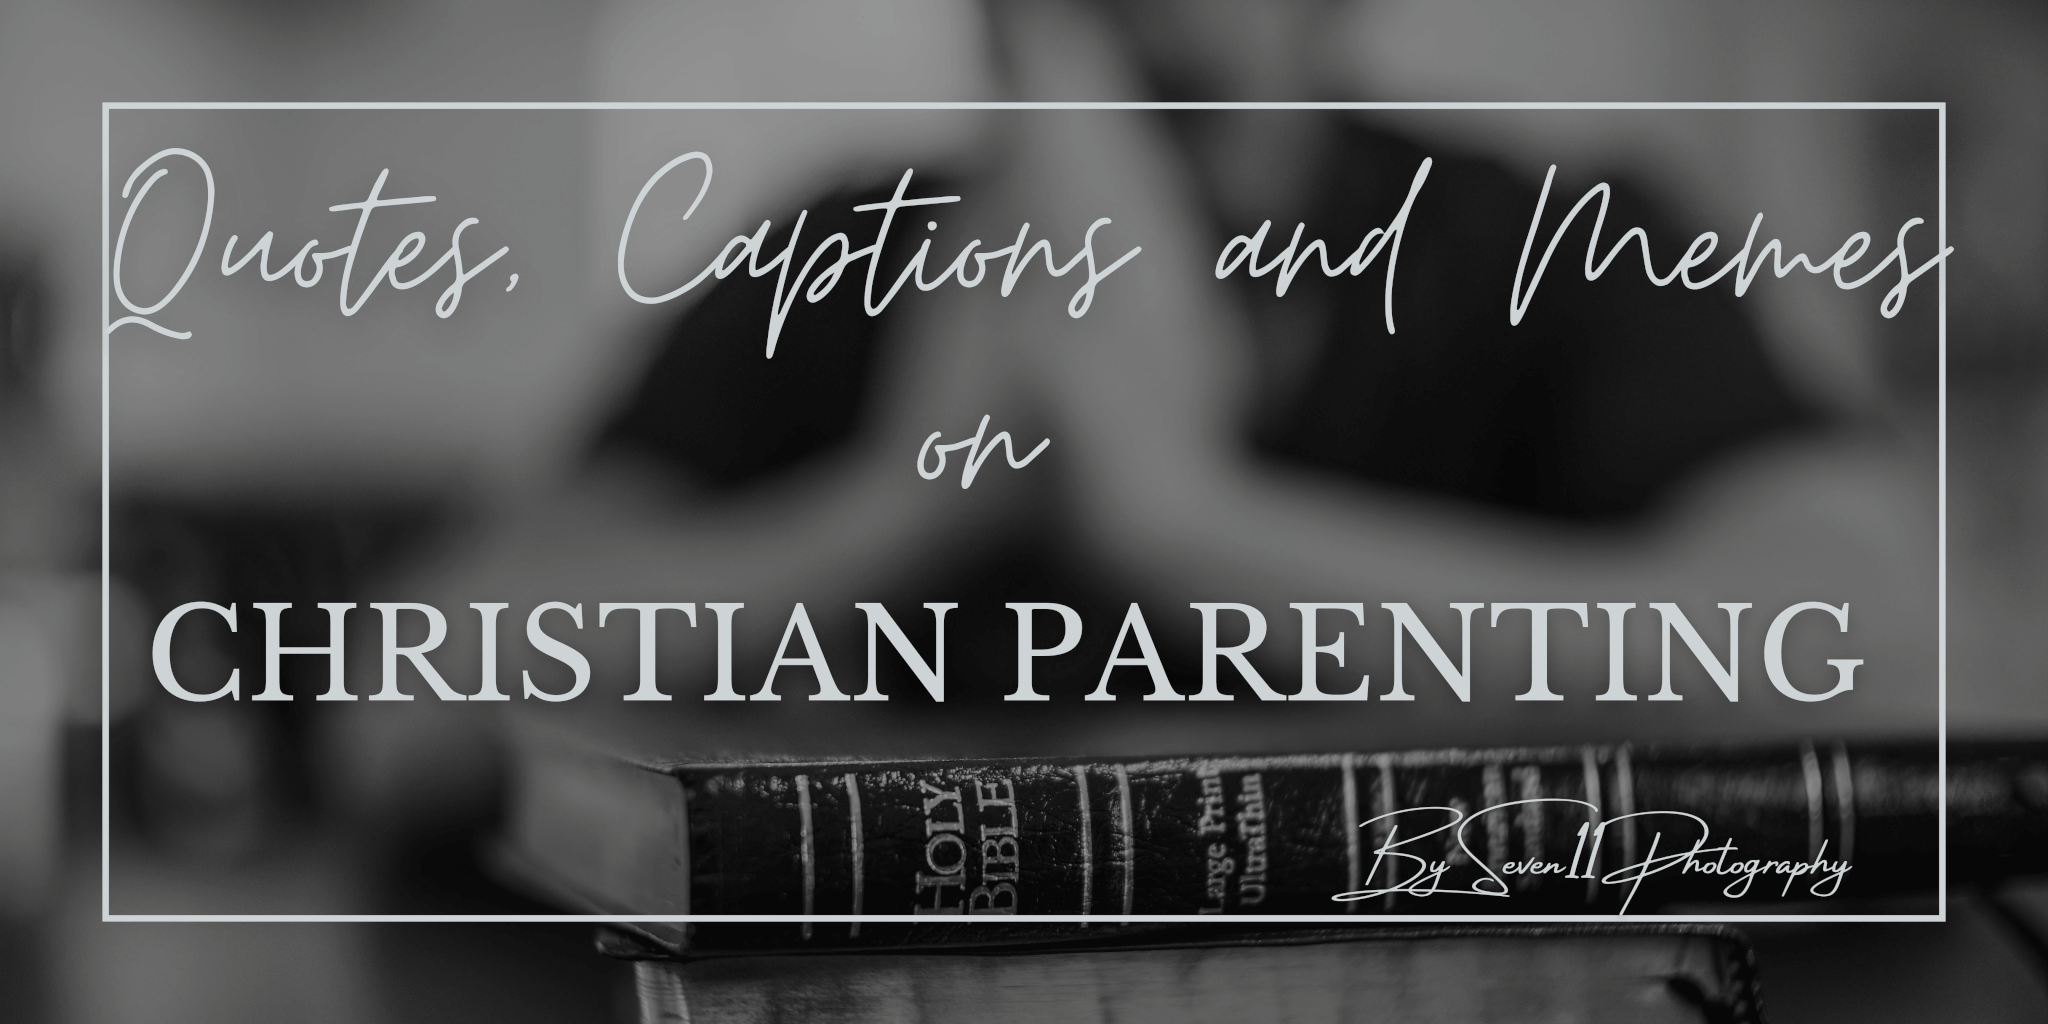 Christian parenting quotes, Christian quotes on parenting, Christian quotes about parenting, Christian quotes for parents, parenting quotes